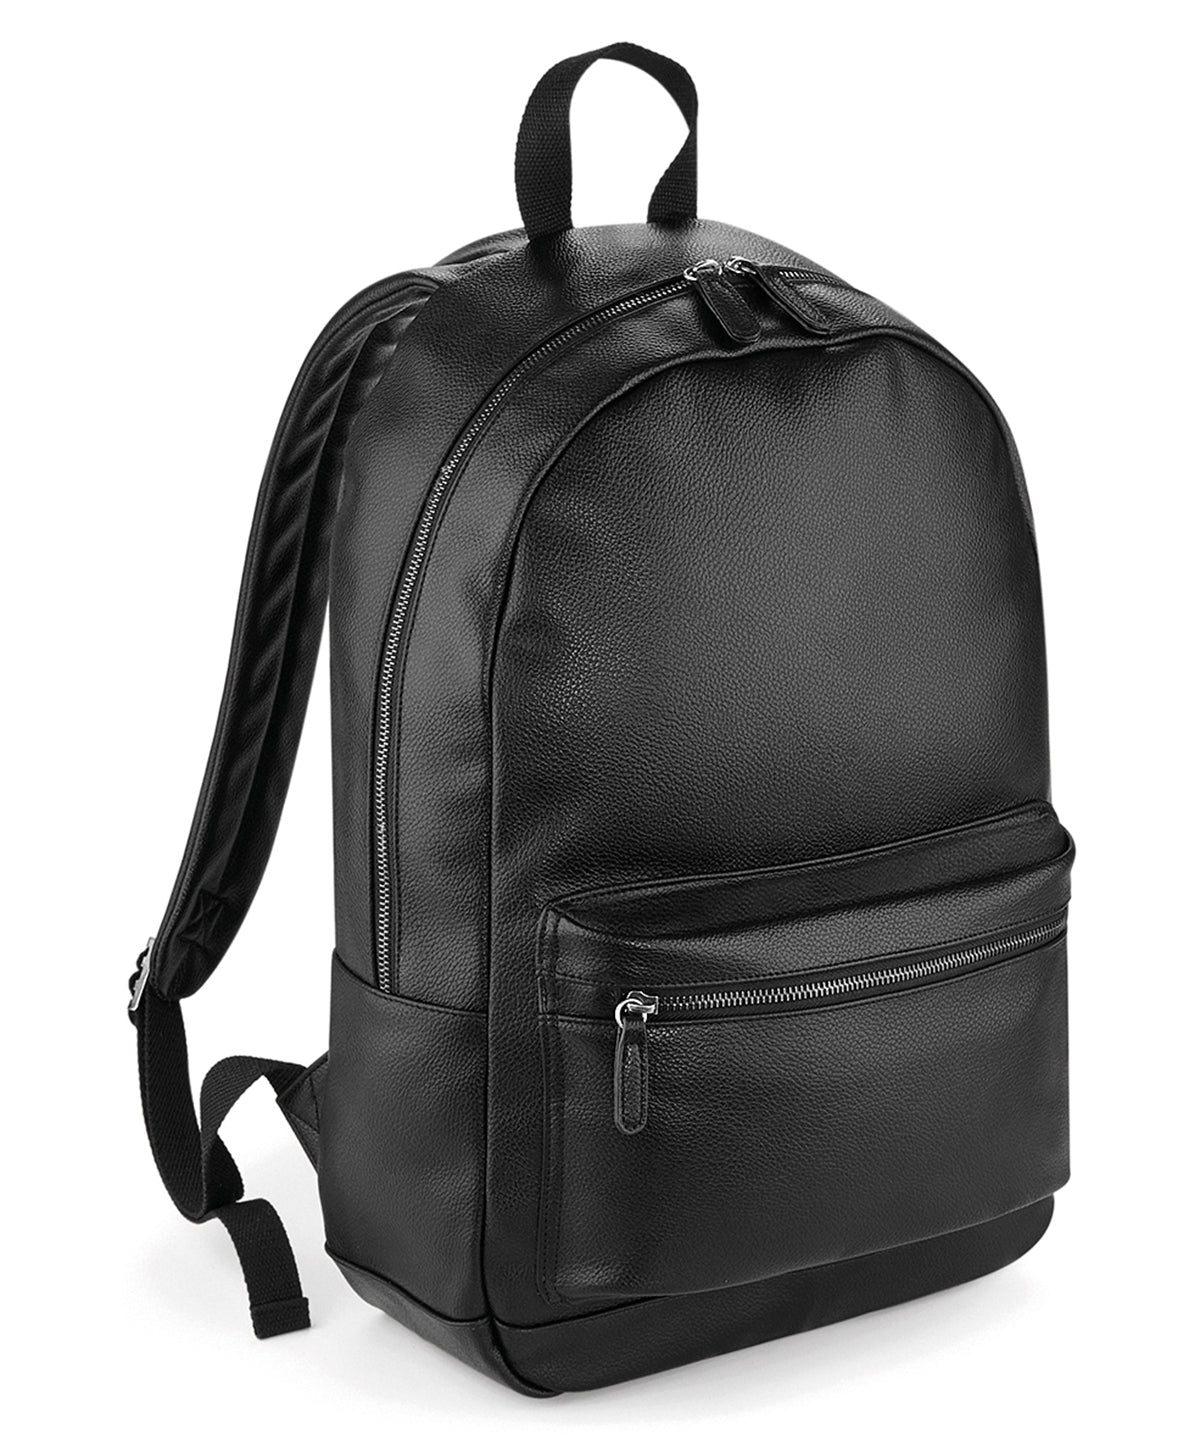 Faux leather fashion backpack